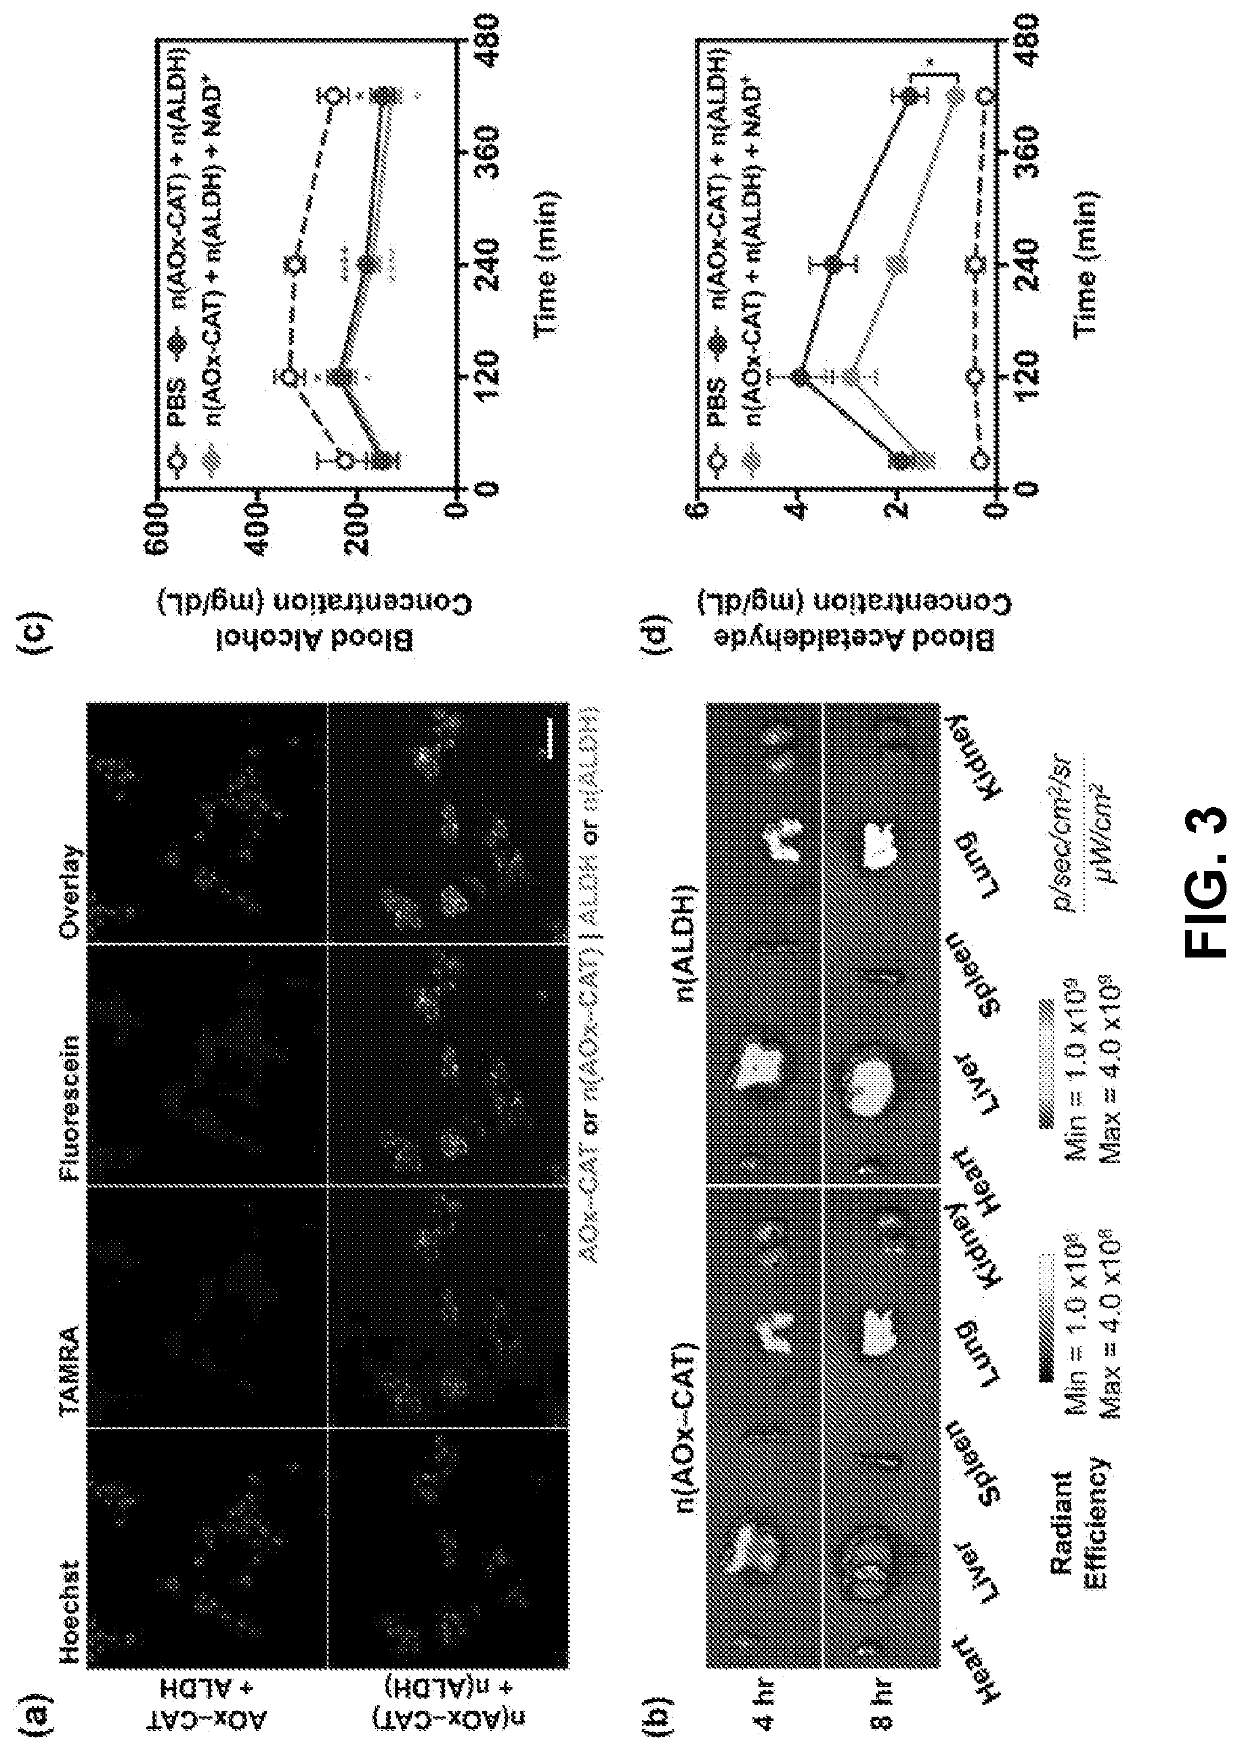 A hepatocyte-mimicking antidote for alcohol intoxication